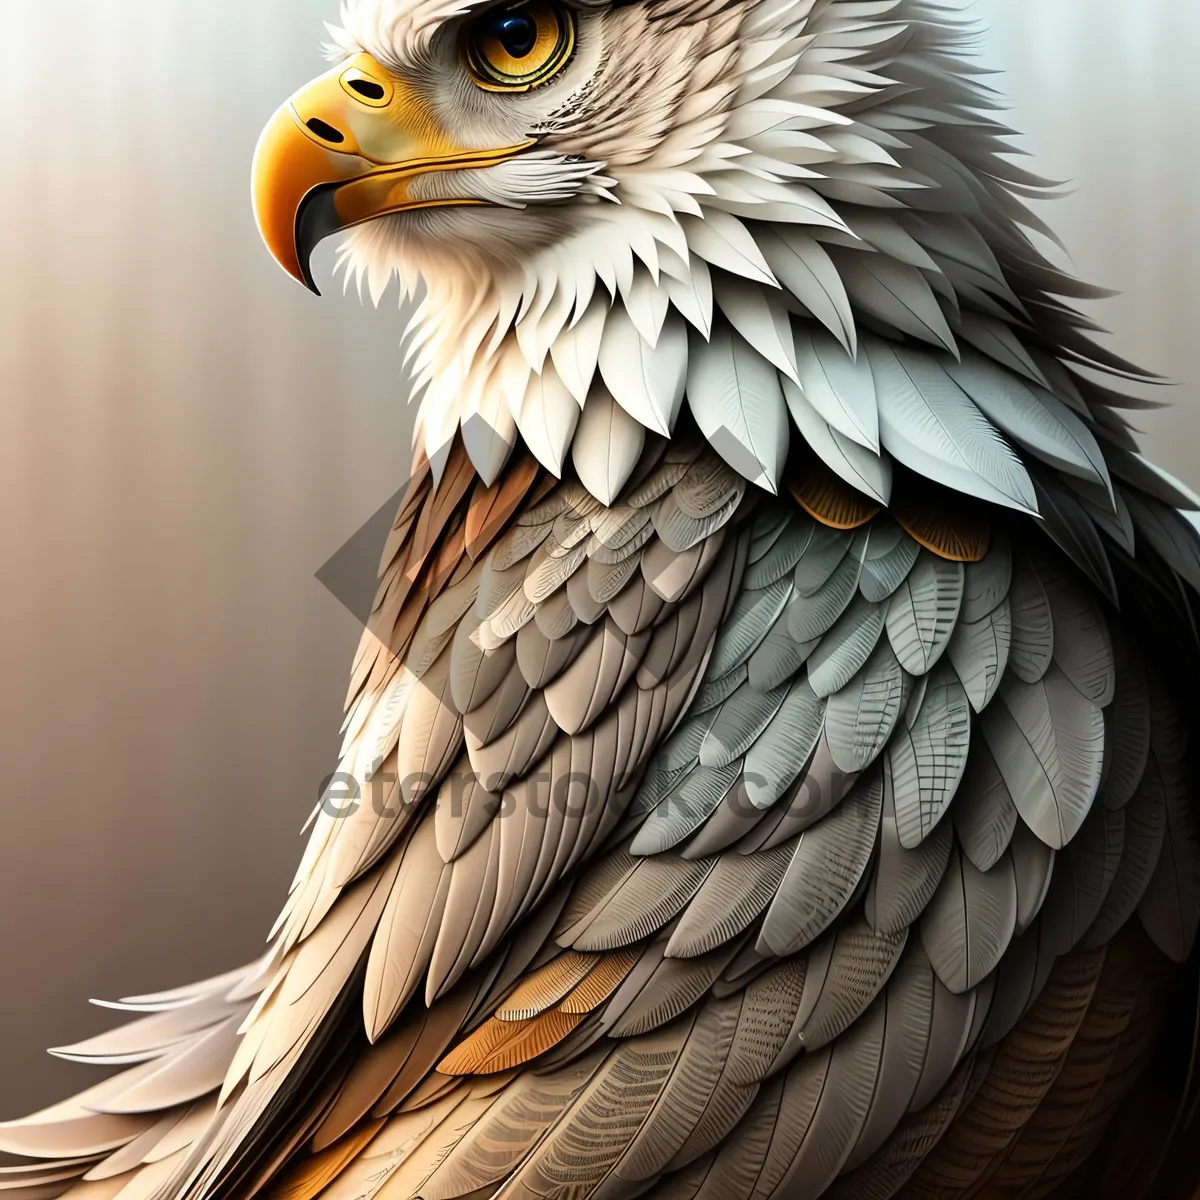 Picture of Majestic Hunter: Bald Eagle with Piercing Yellow Eyes